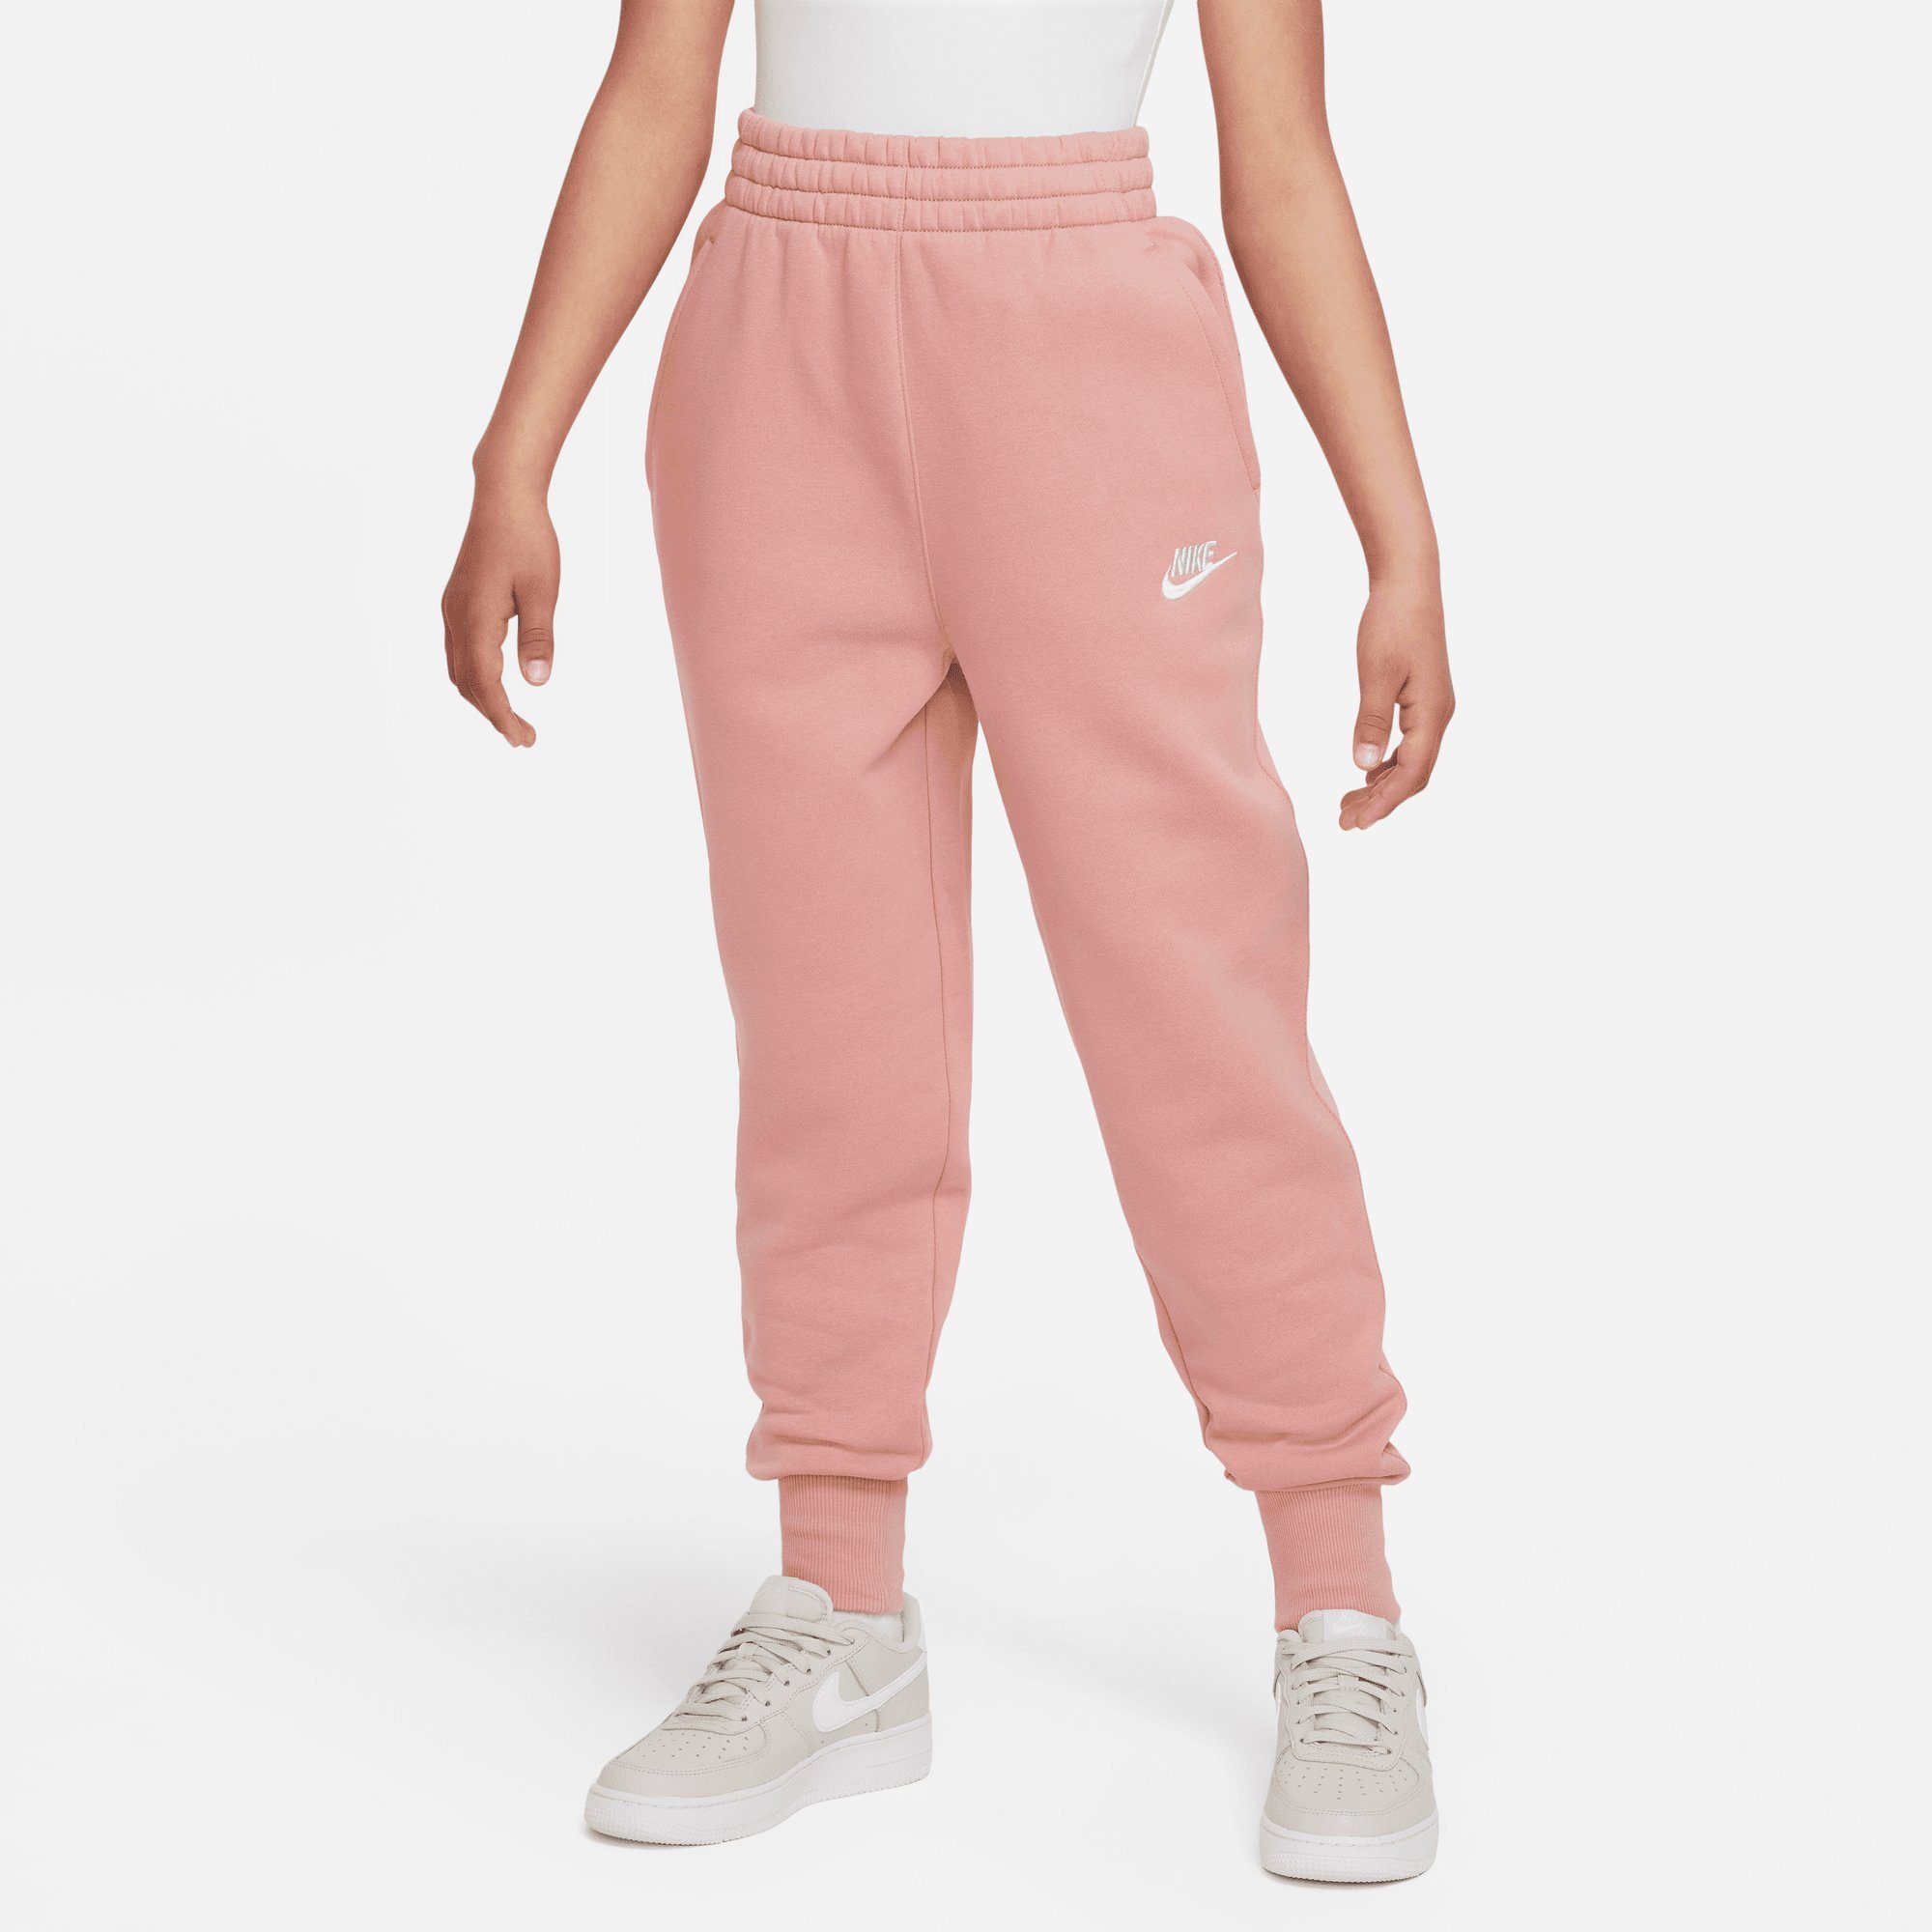 CLUB RED FLEECE PANTS Nike Sportswear STARDUST/WHITE (GIRLS) KIDS' STARDUST/RED Jogginghose HIGH-WAISTED BIG FITTED